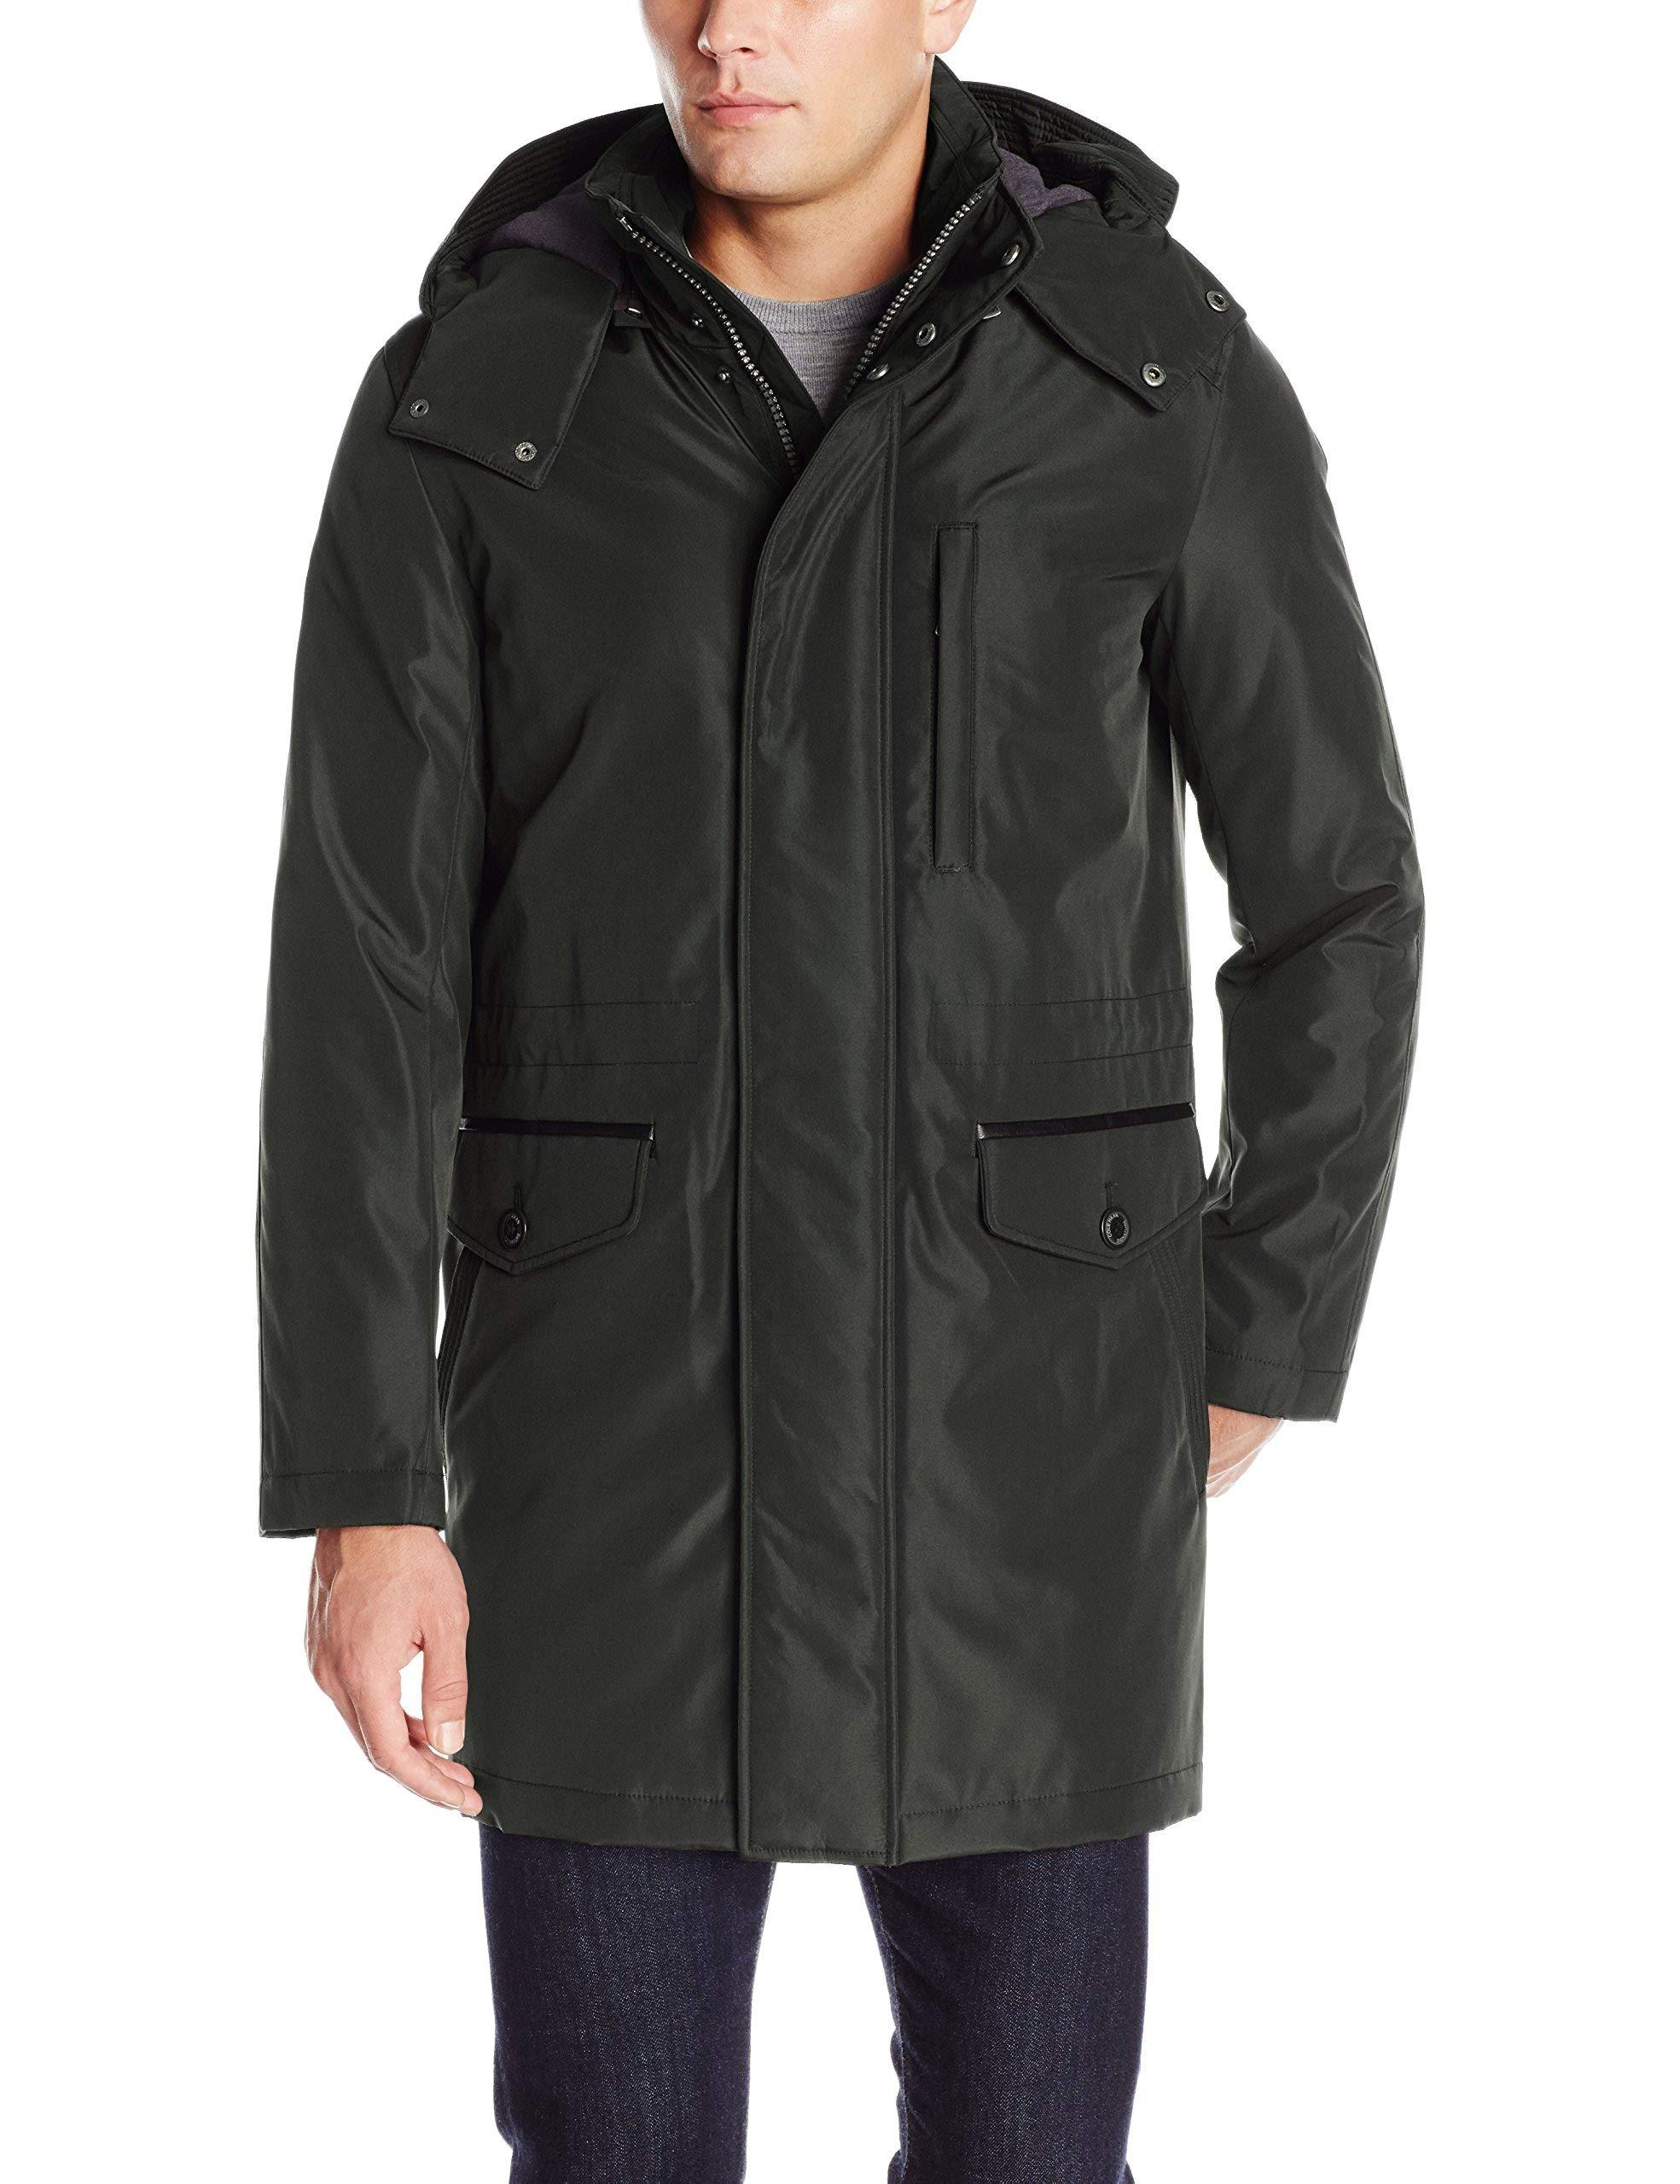 Cole Haan Synthetic Bonded Nylon Car Coat With Attached Hood in Black